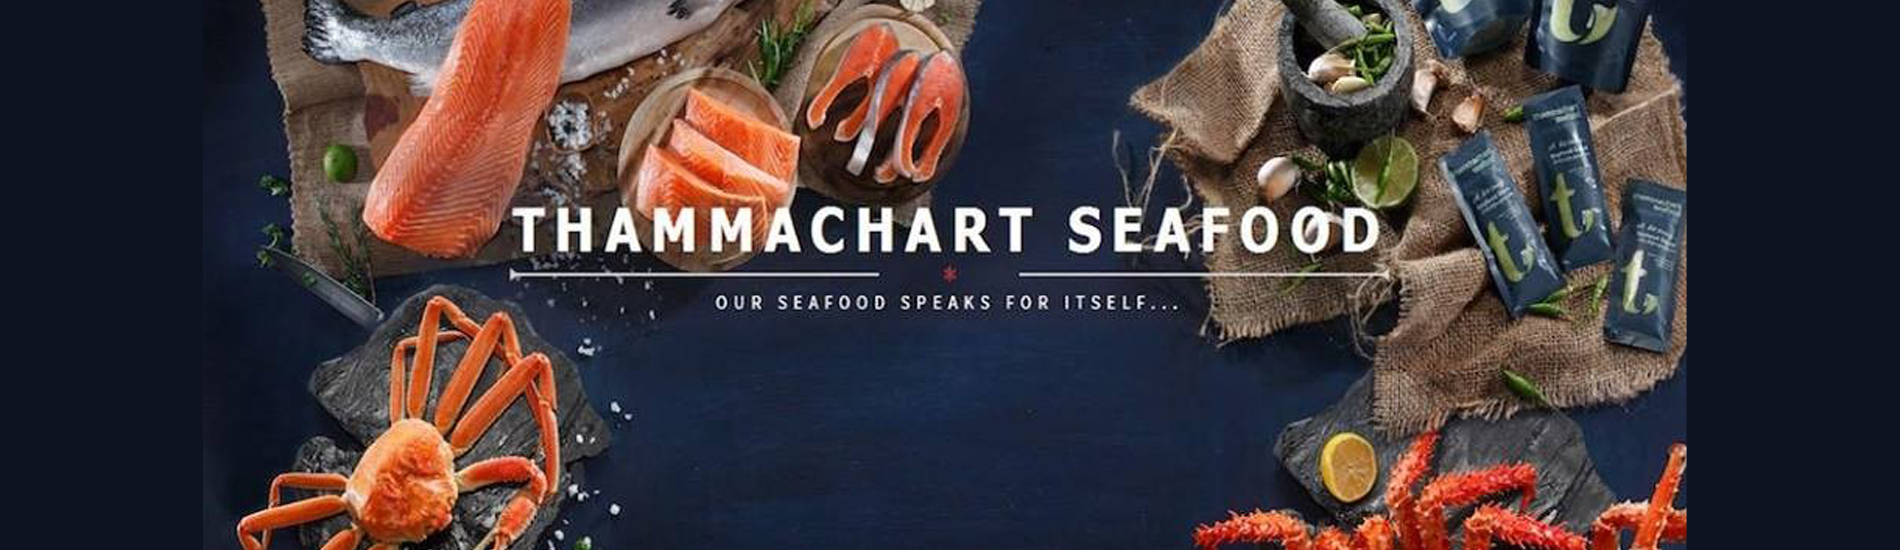 Healthy eating with Thammachart Seafood